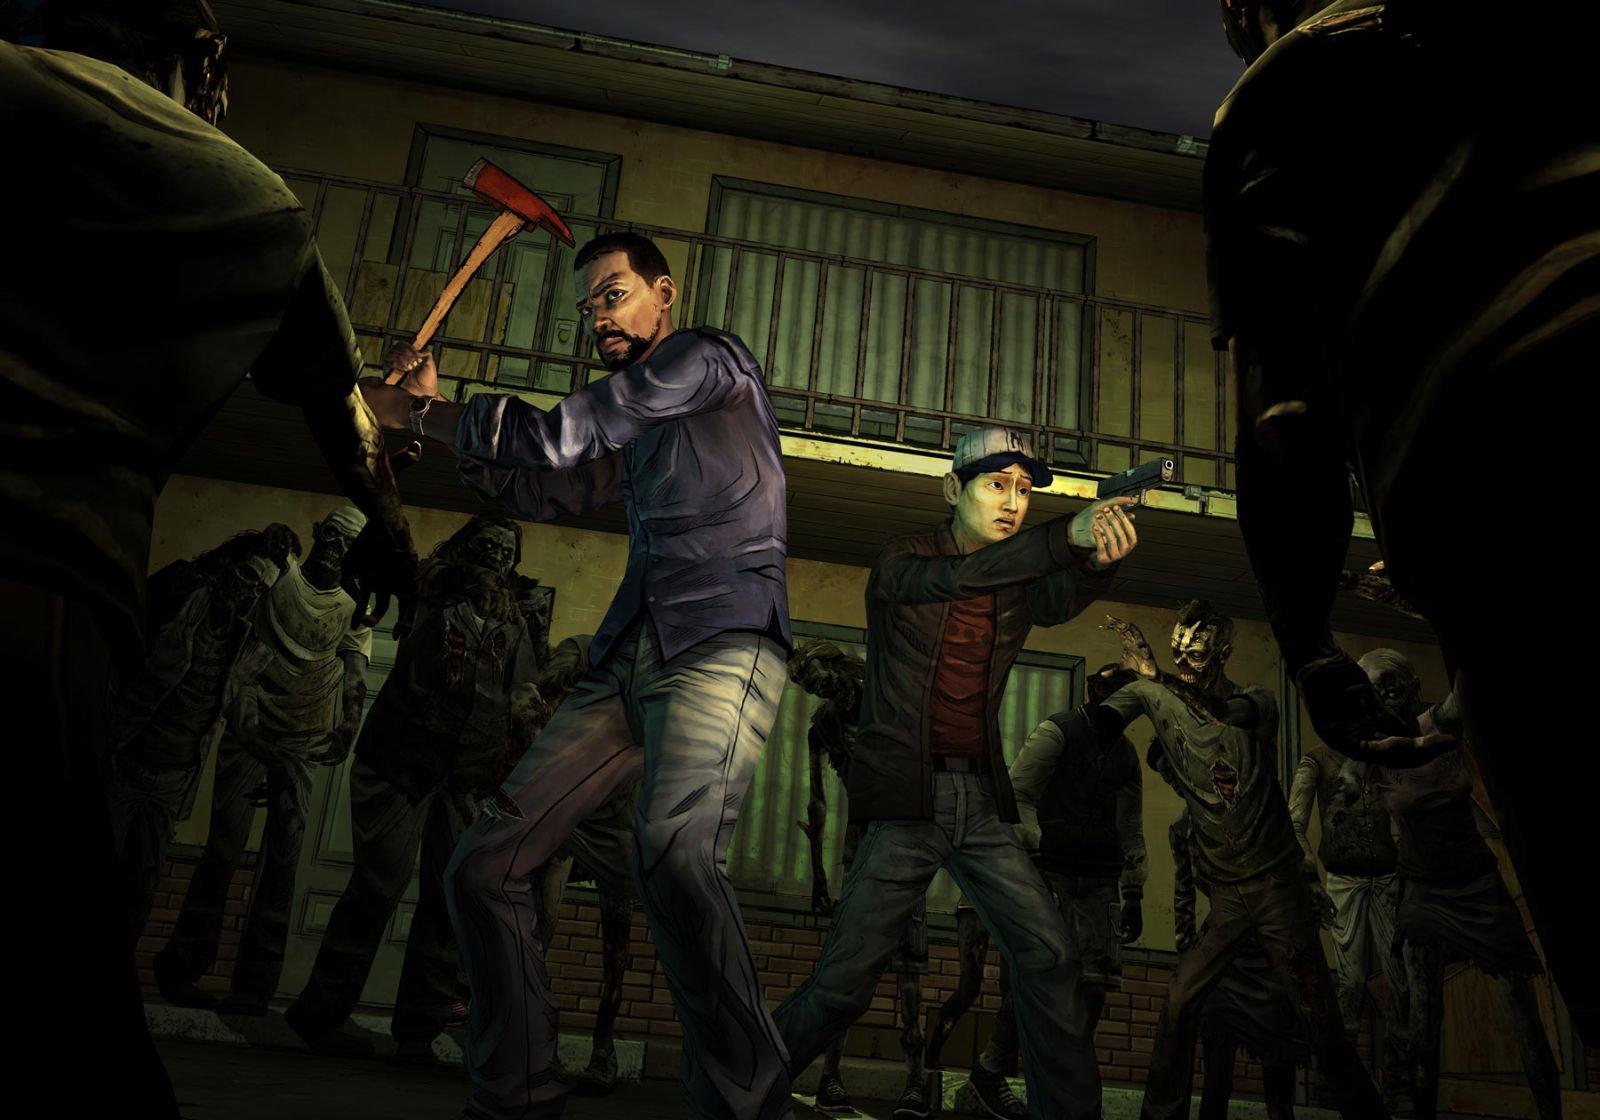 Walking-Dead-s-Lee-Is-Partly-Defined-by-His-Race-Says-Telltale-Games-2.jpg